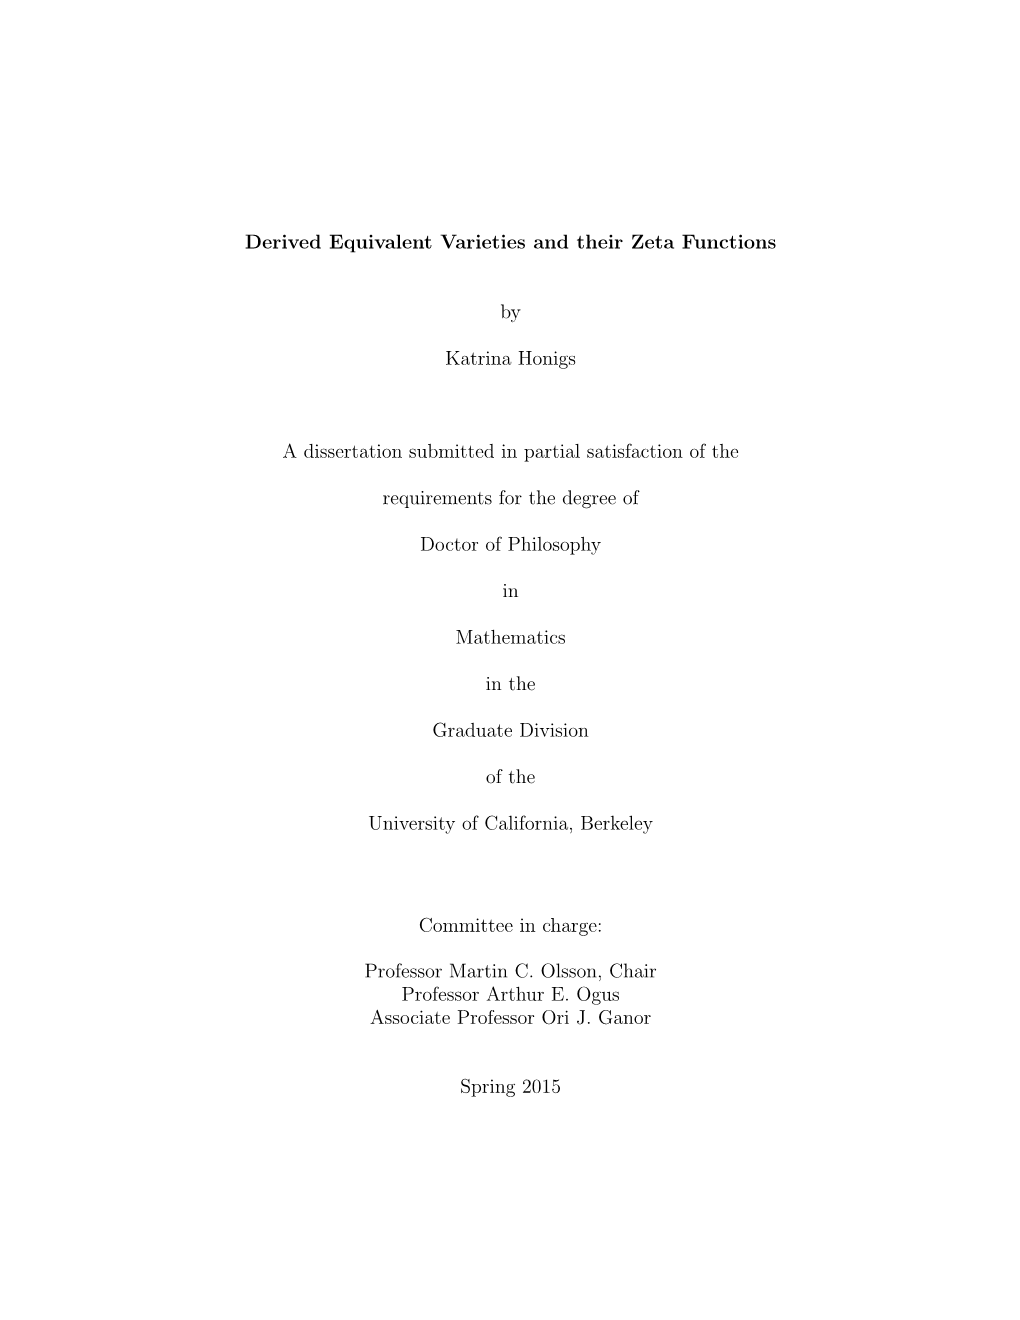 Derived Equivalent Varieties and Their Zeta Functions by Katrina Honigs A